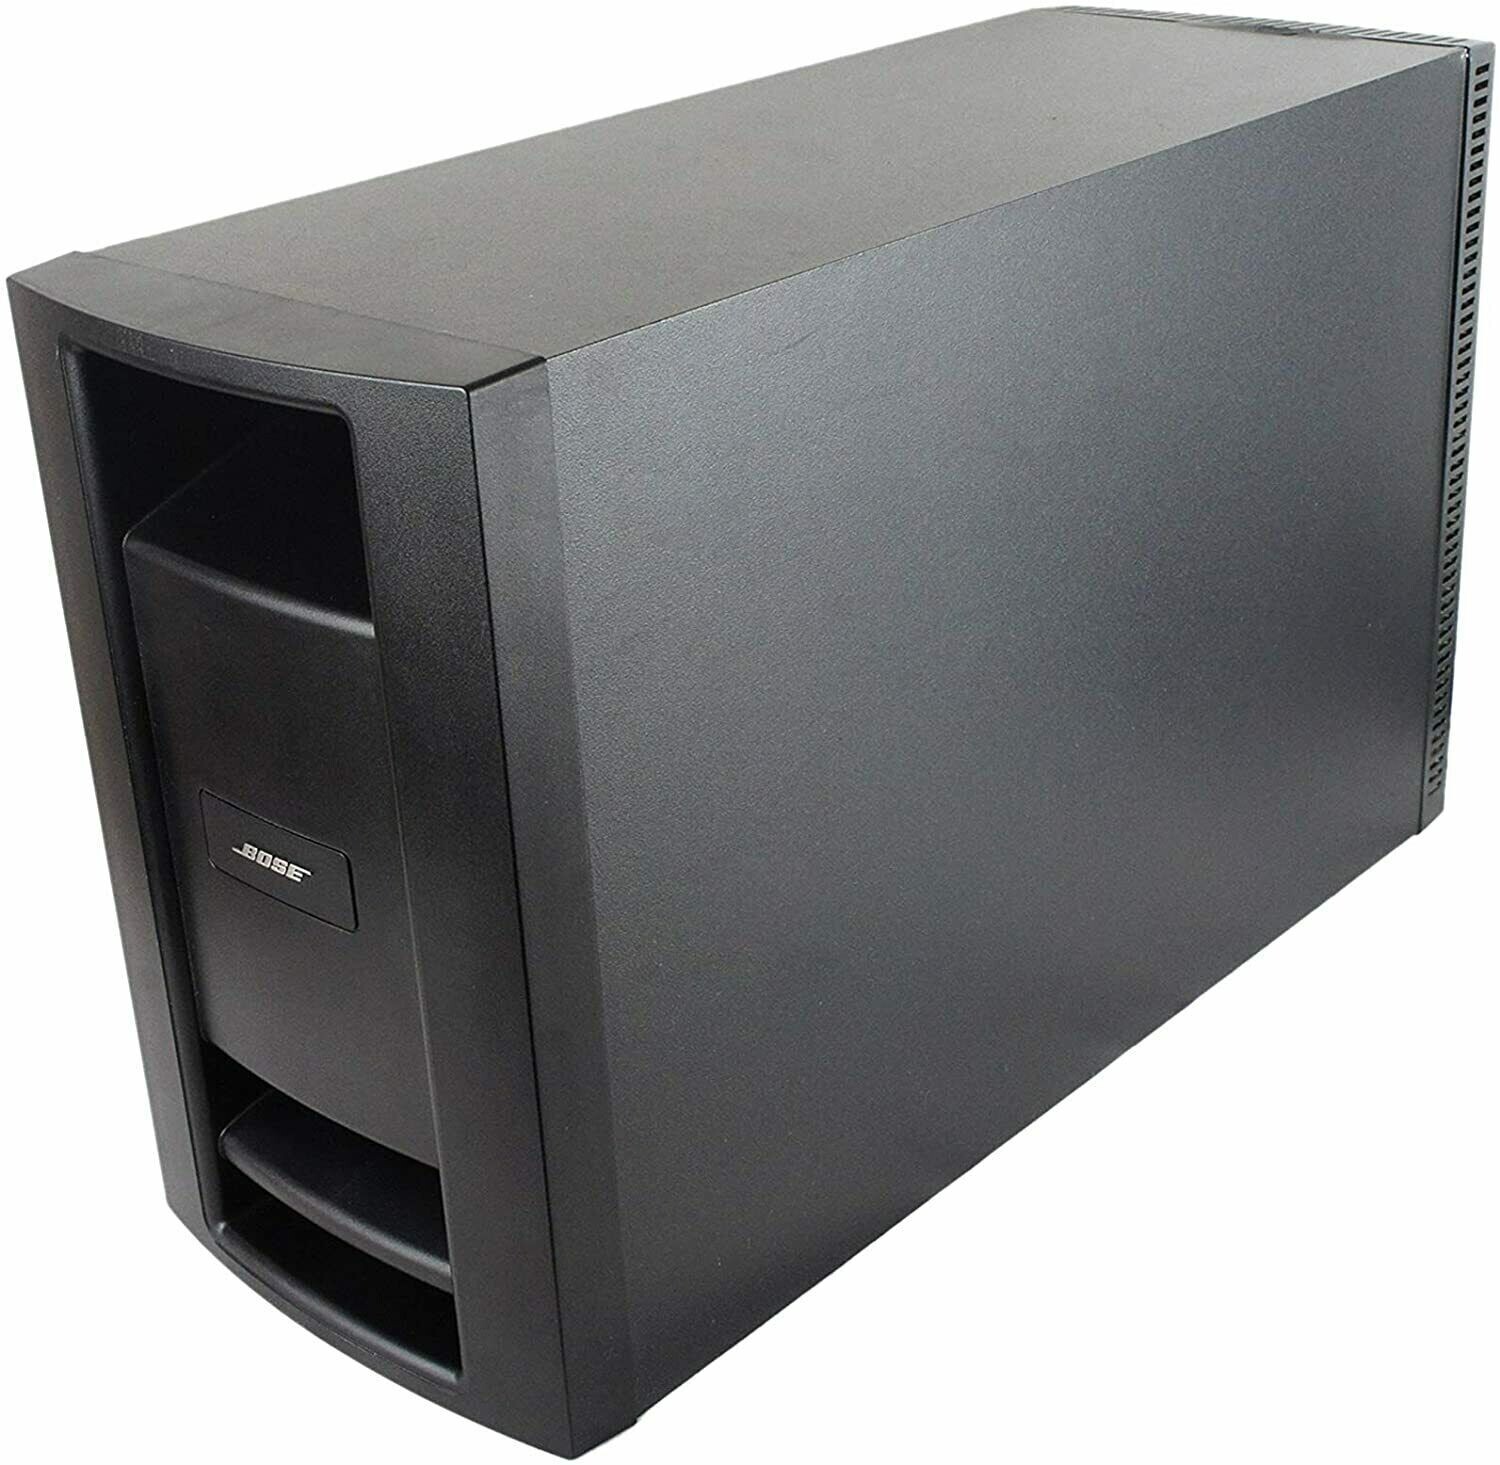 Replacement Bose Subwoofer for Bose Lifestyle Soundtouch 525 535